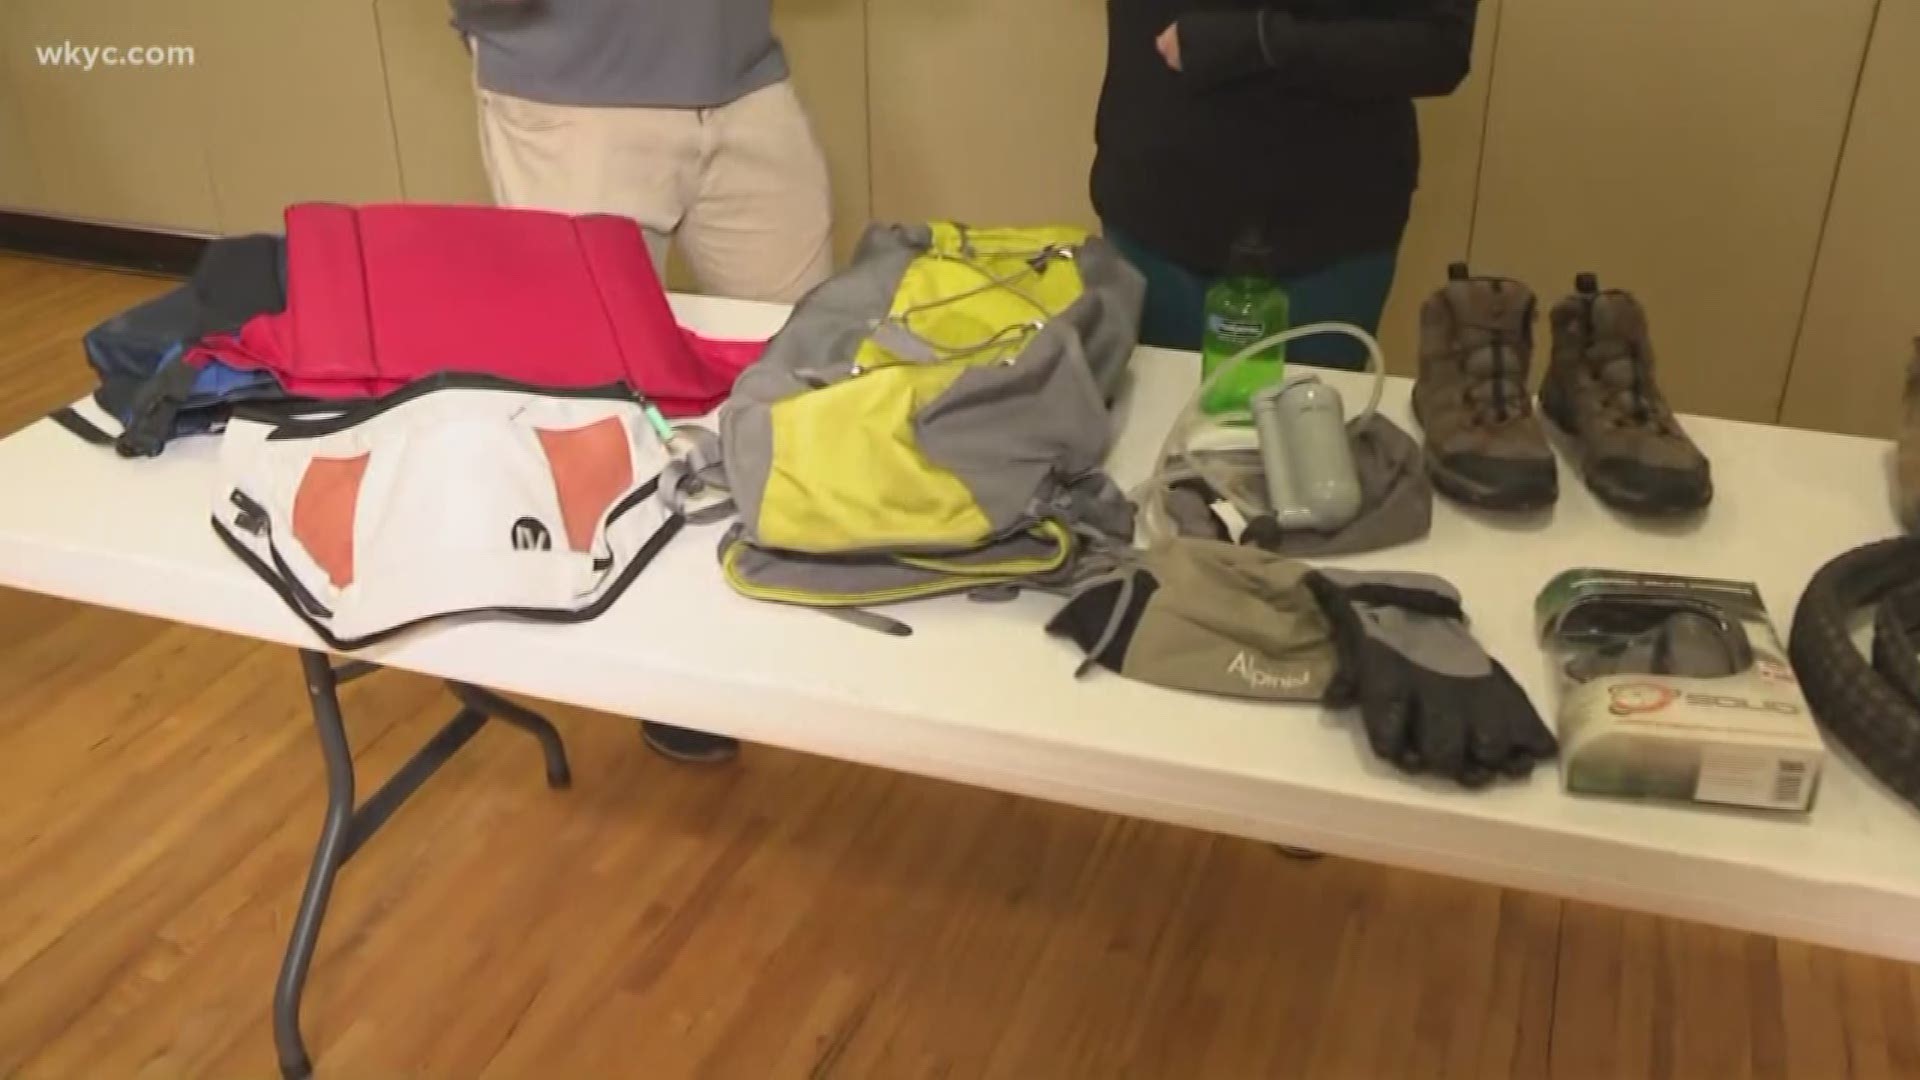 Lindsay speaks to Dr. Jesse Jones about swapping backpacking and adventure gear.